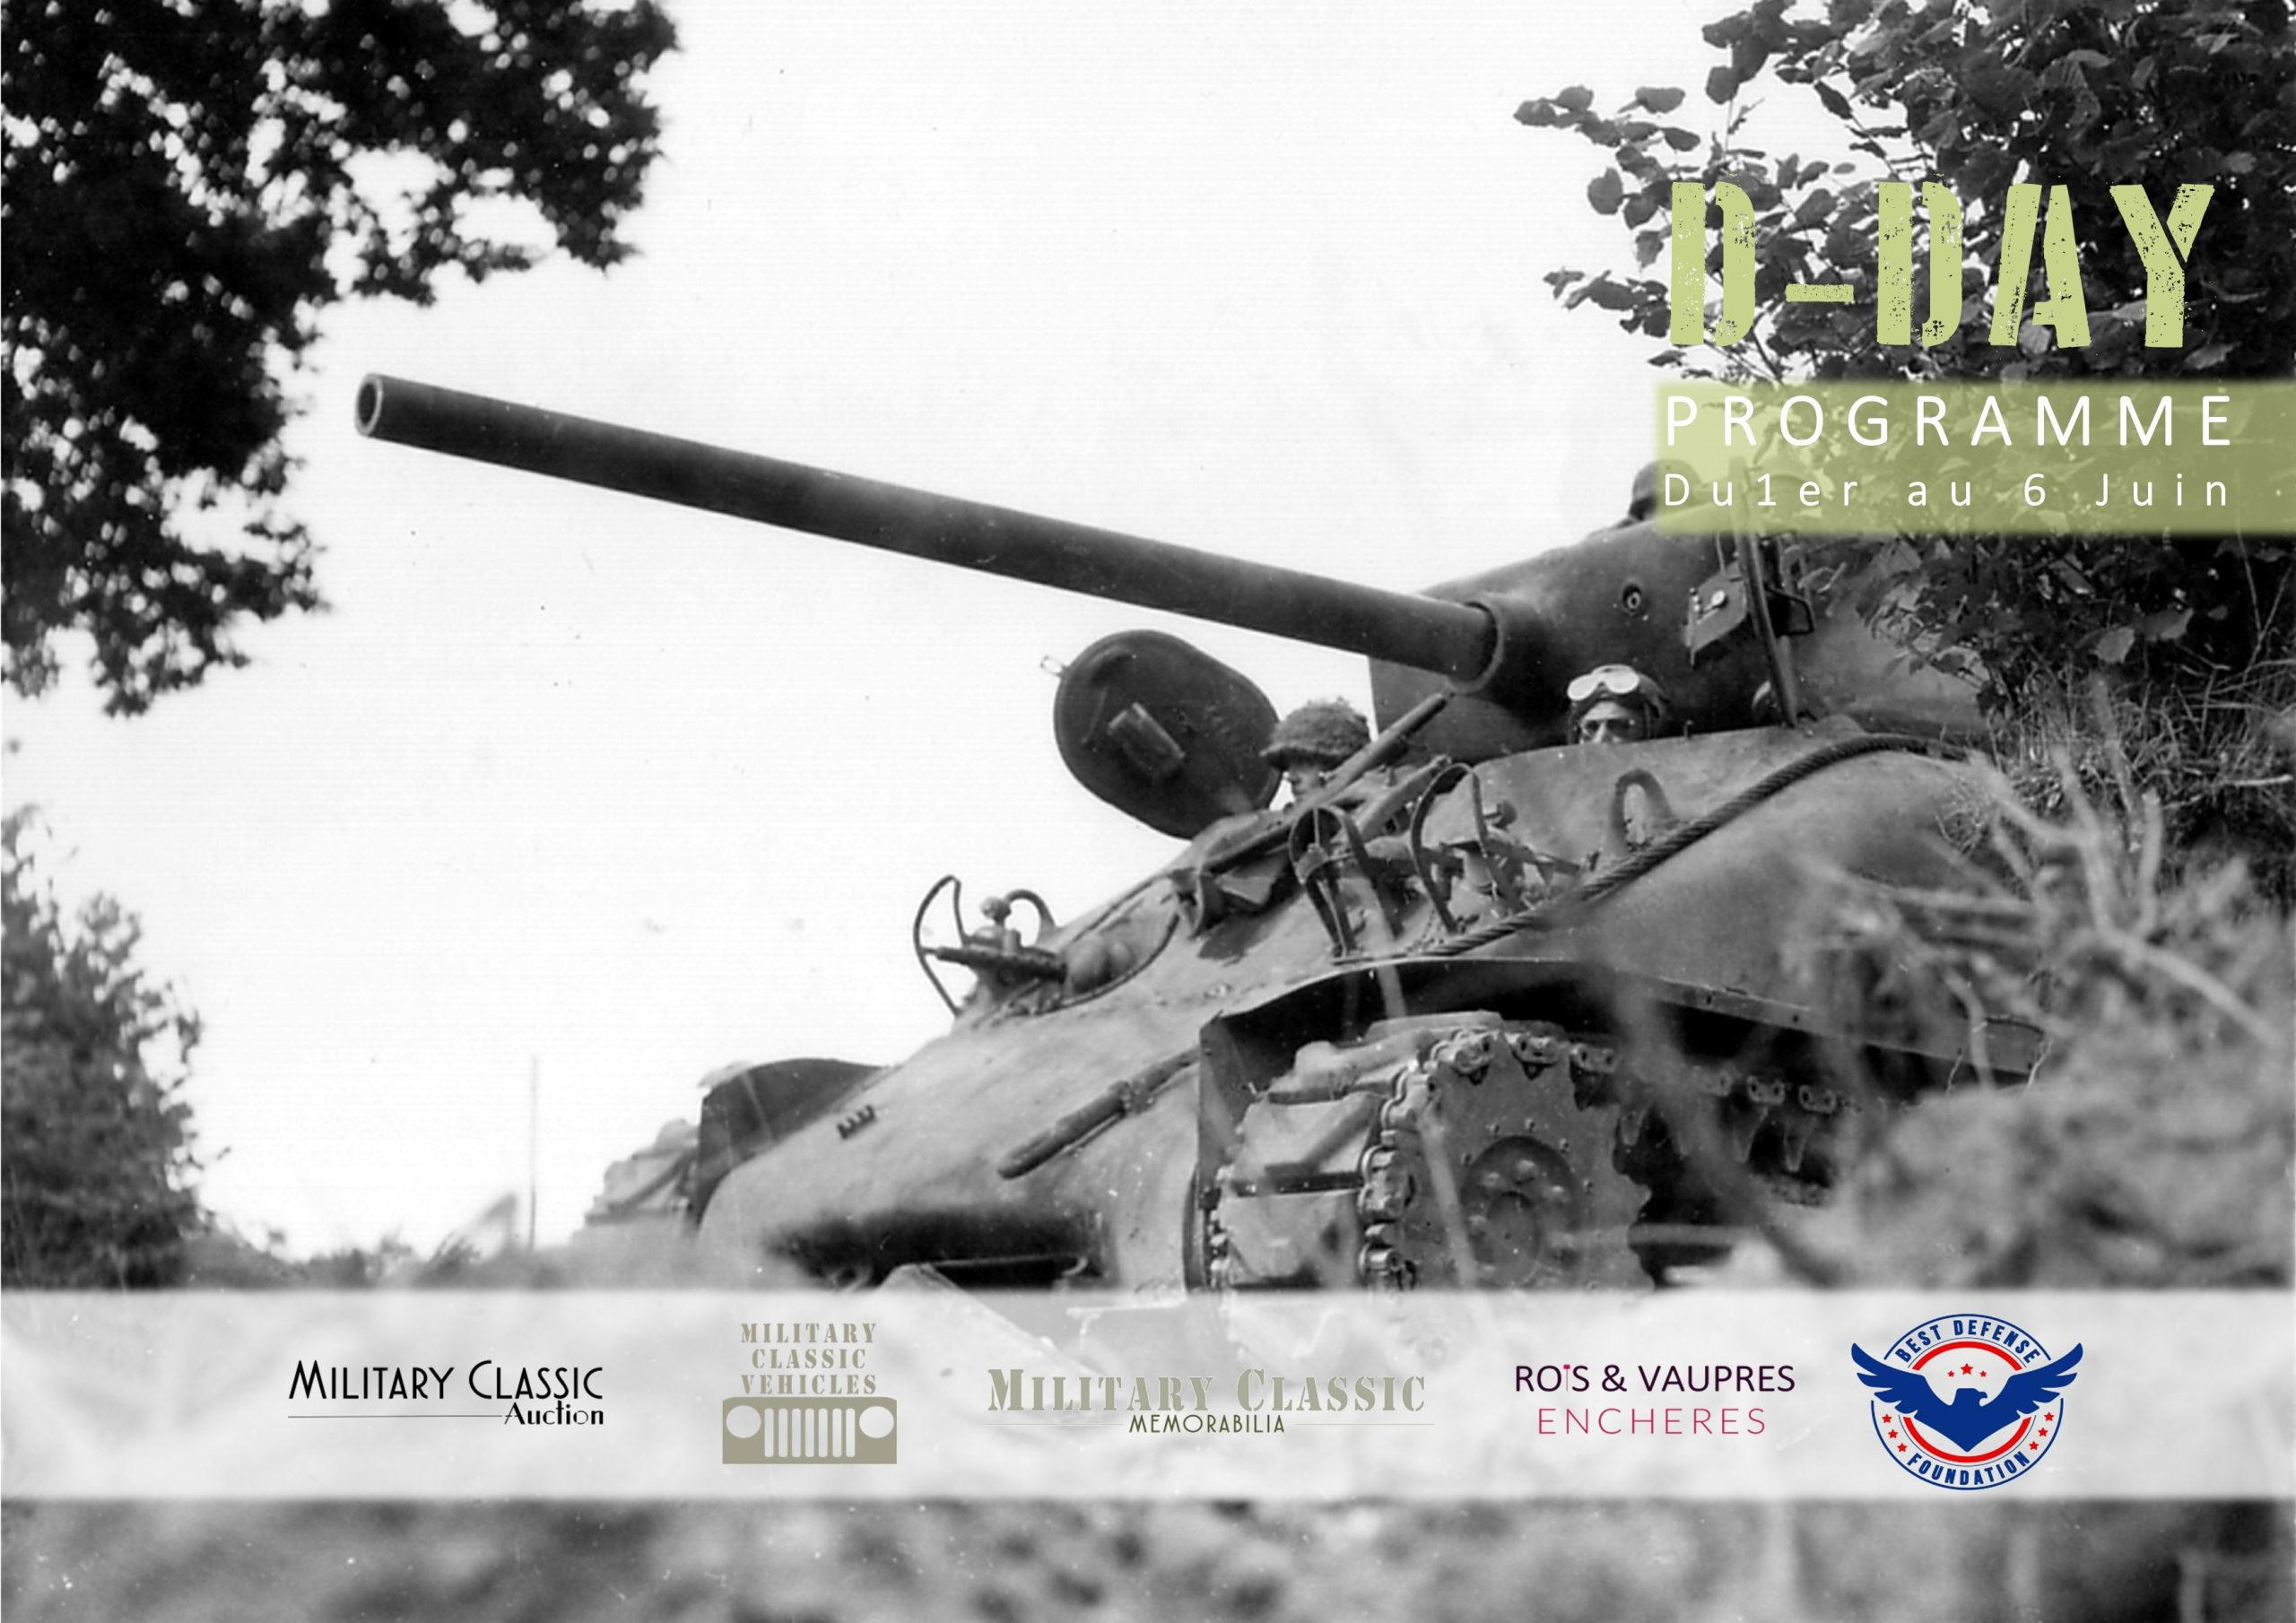 D-DAY 79th “The event in Normandy / PROGRAM